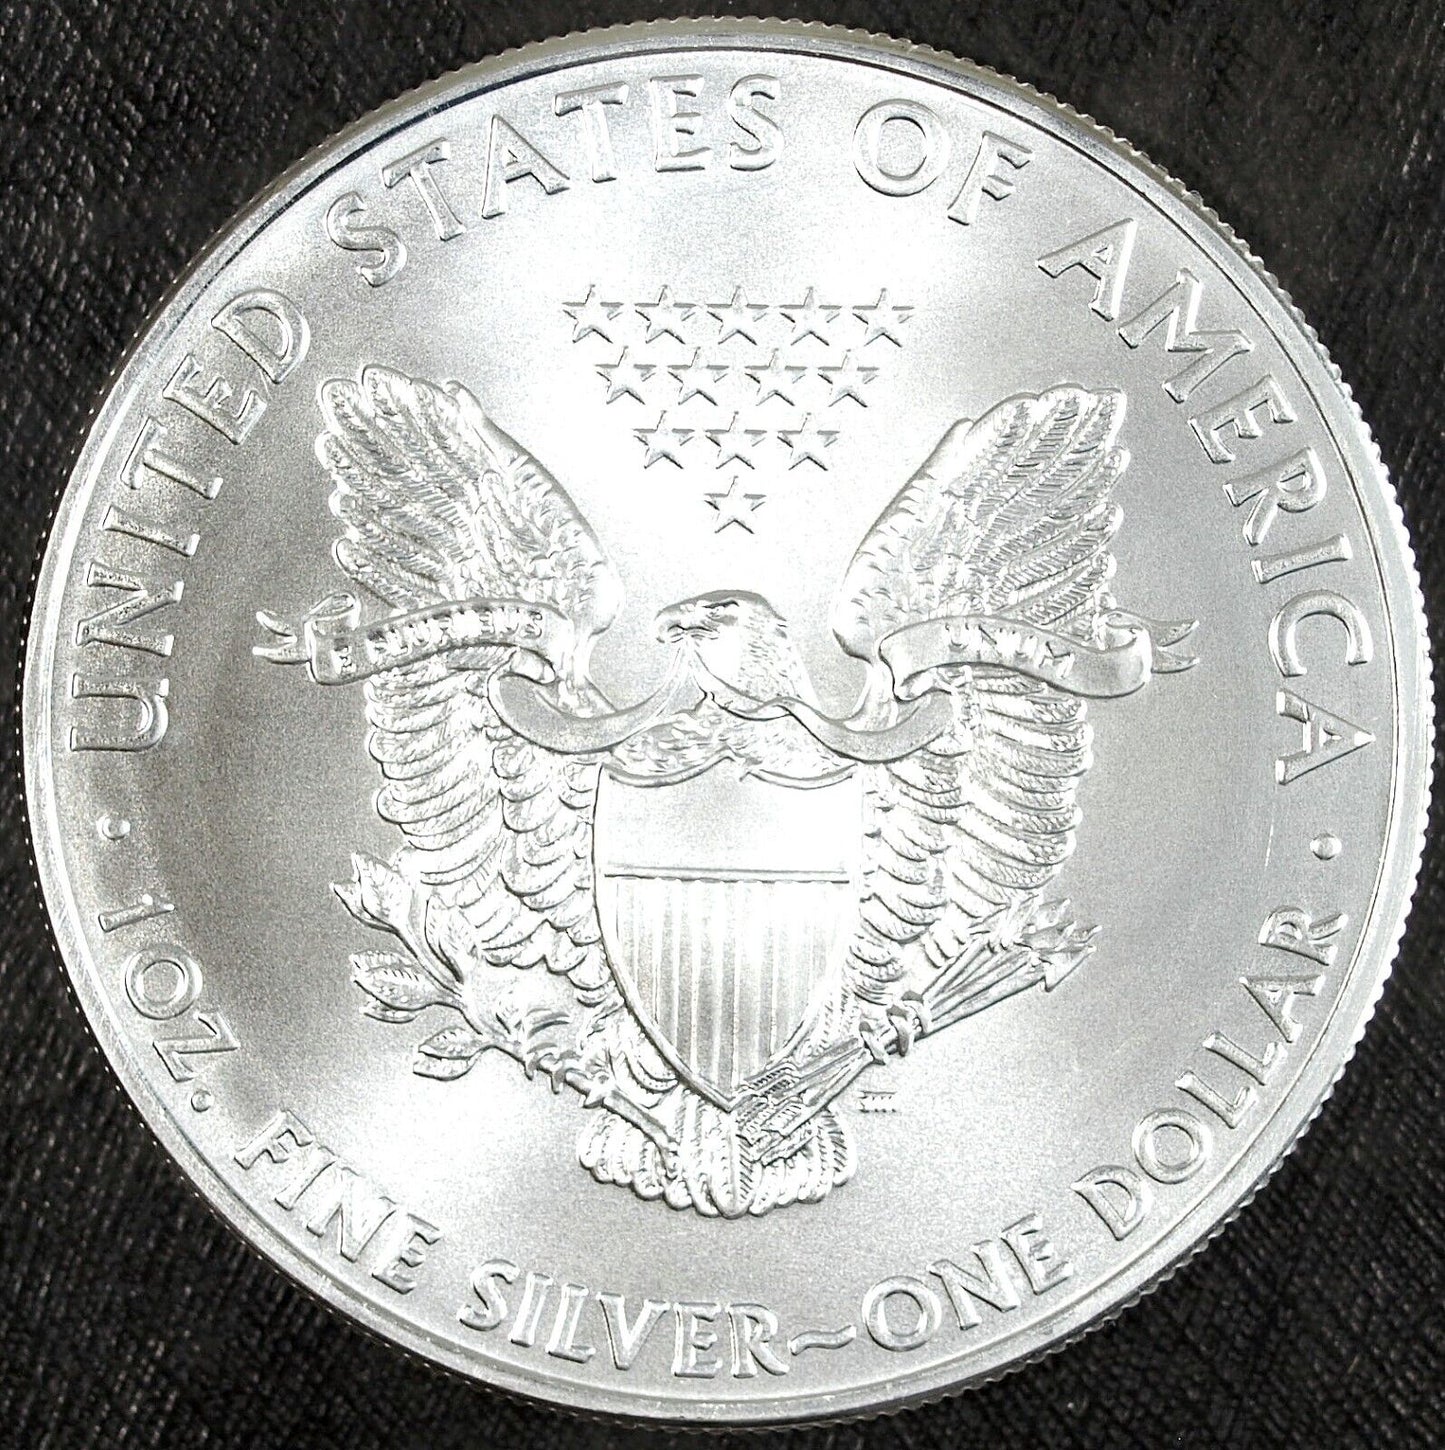 2011 U.S. Mint American Silver Eagle ☆☆ Uncirculated ☆☆ Great Collectible 502